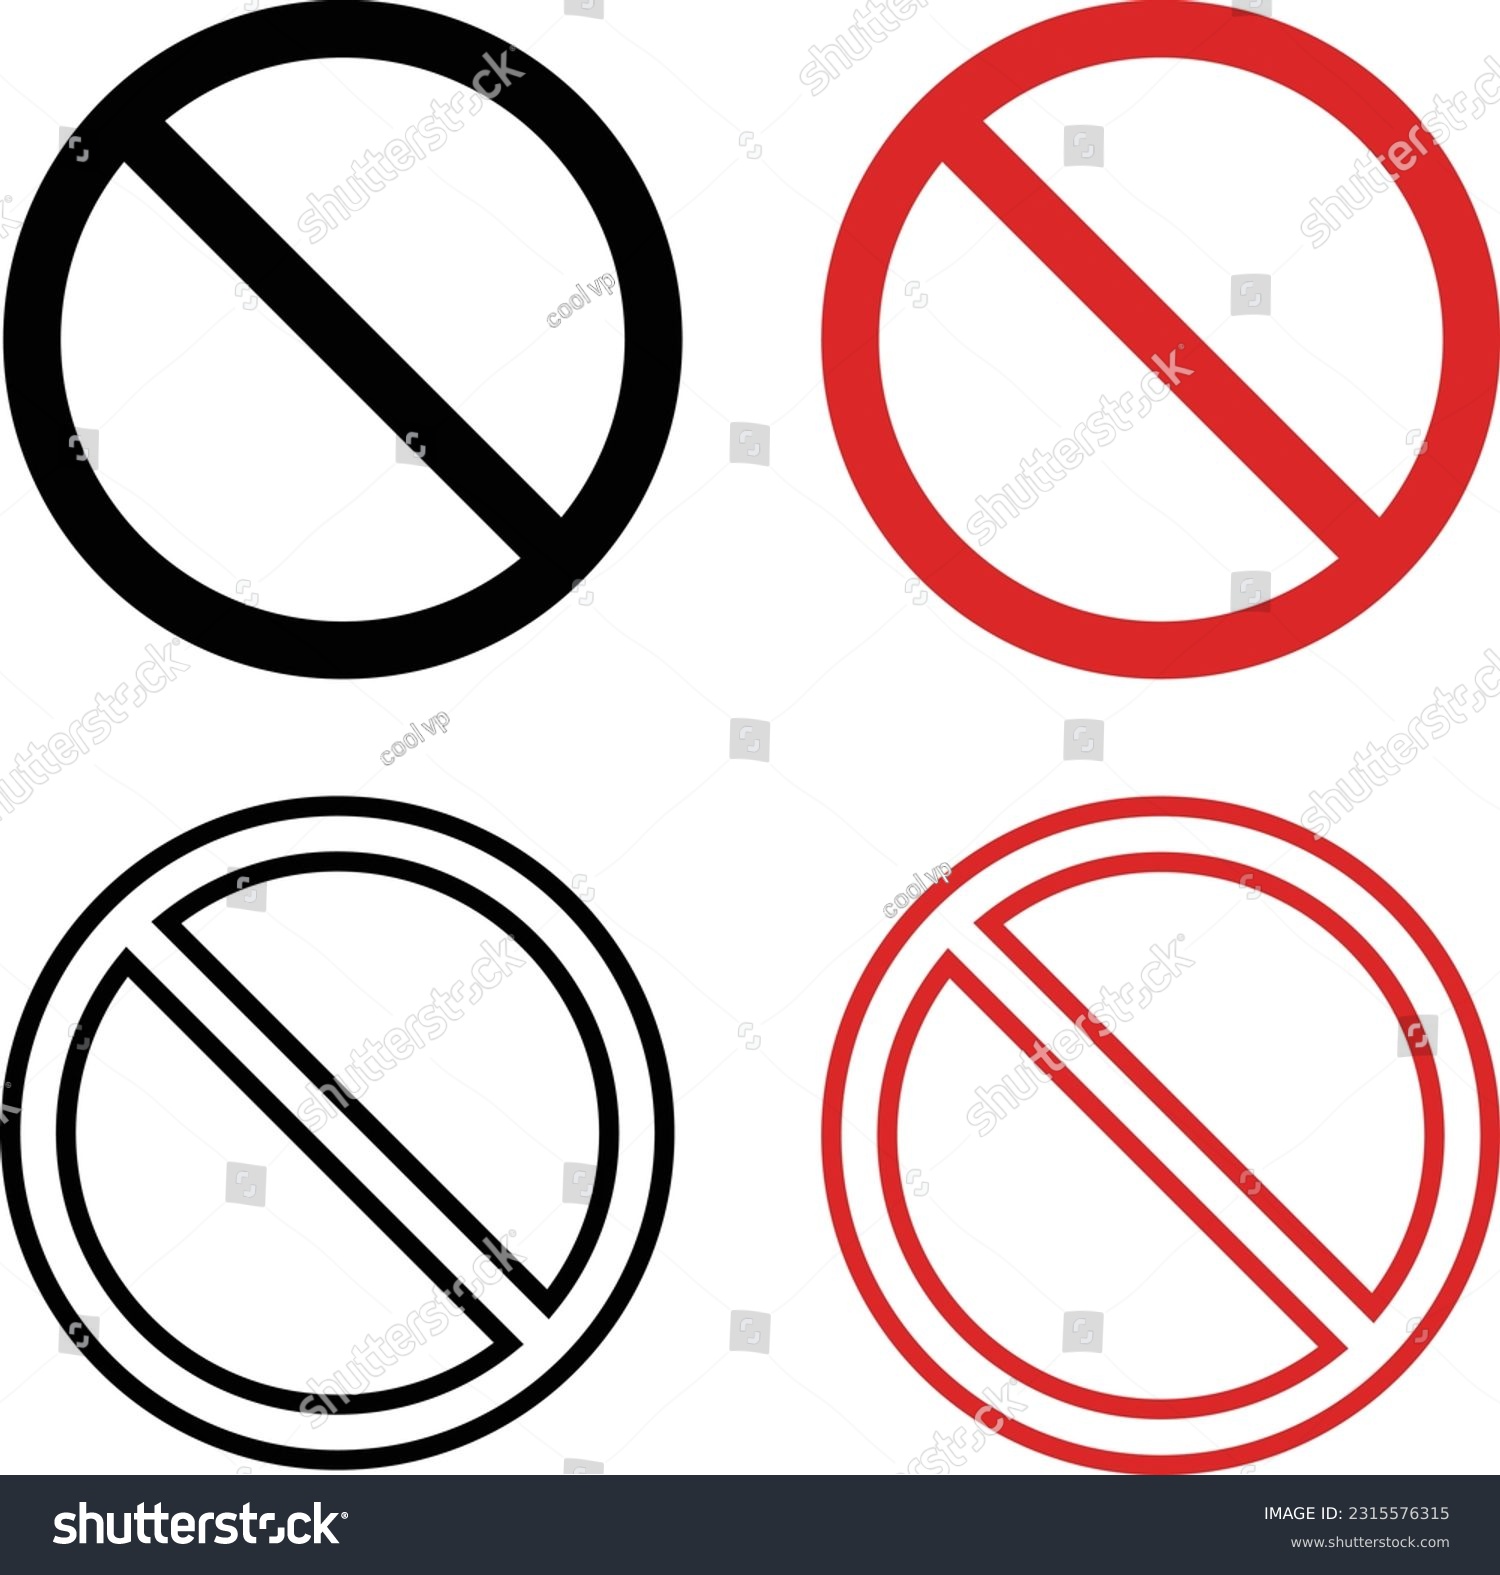 SVG of Restricted icon set . Red and black restriction icon vector design. Prohibition symbol. taboo concept. Danger sign. svg